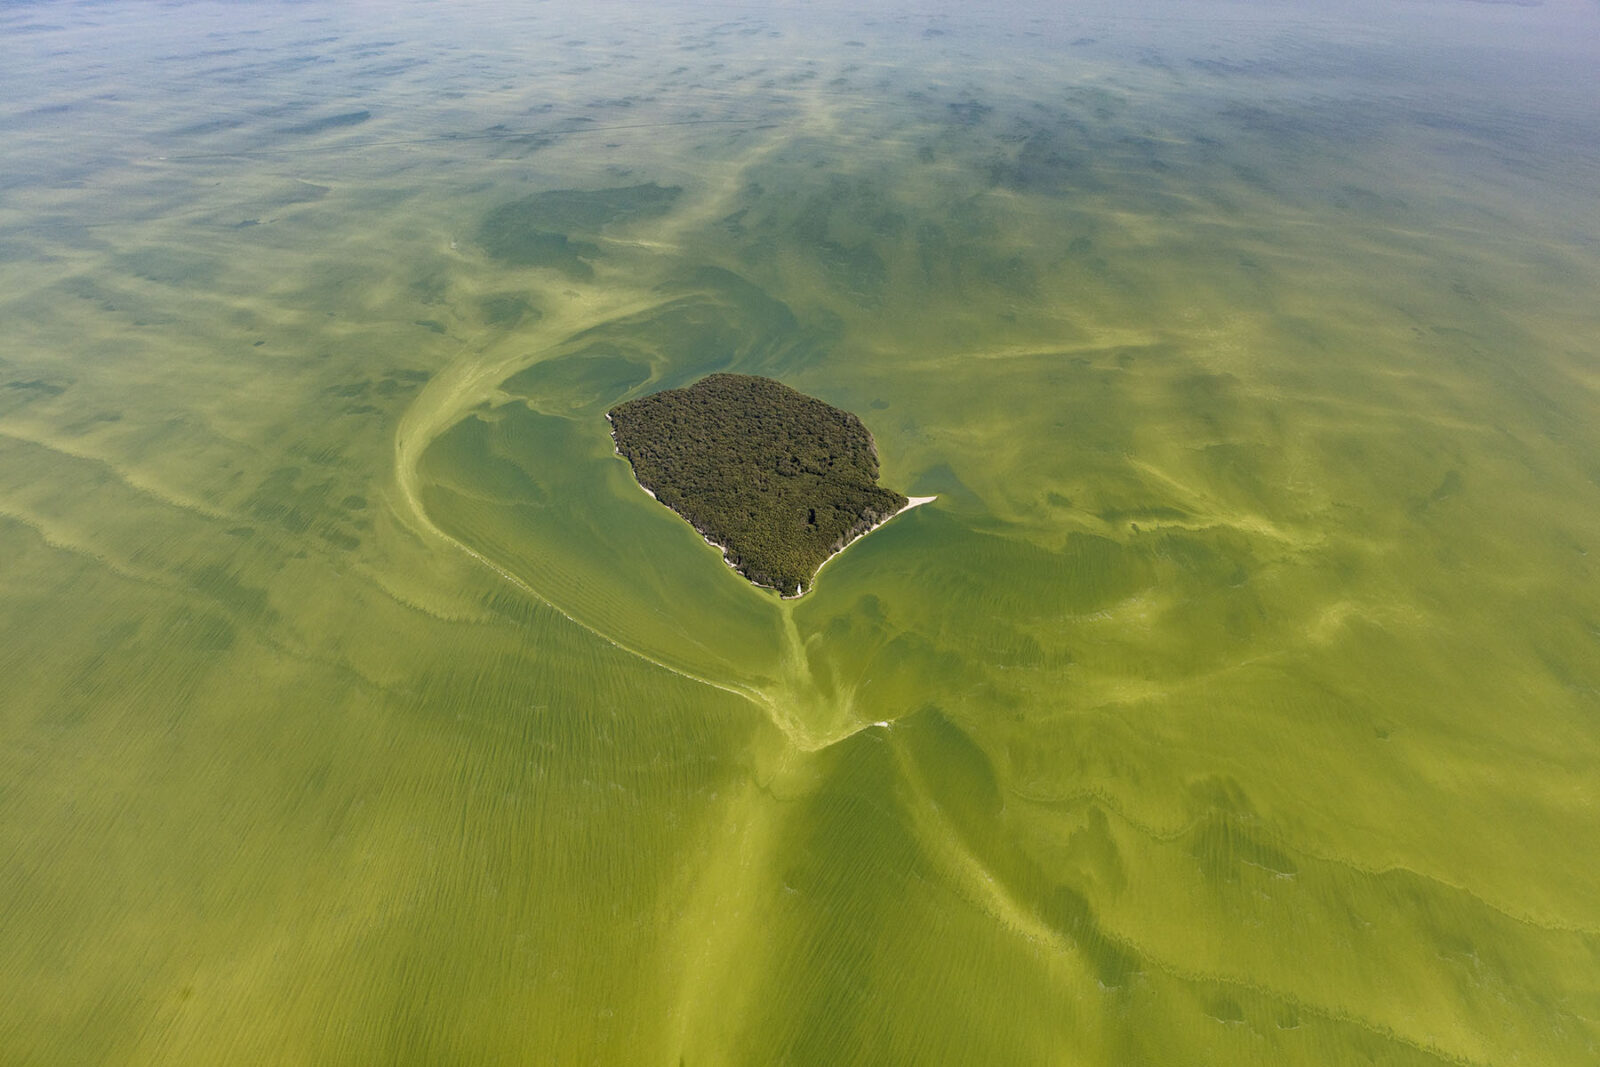 Aerial view of Lake Erie; an intense green algal bloom can be seen over a large portion of the lake.